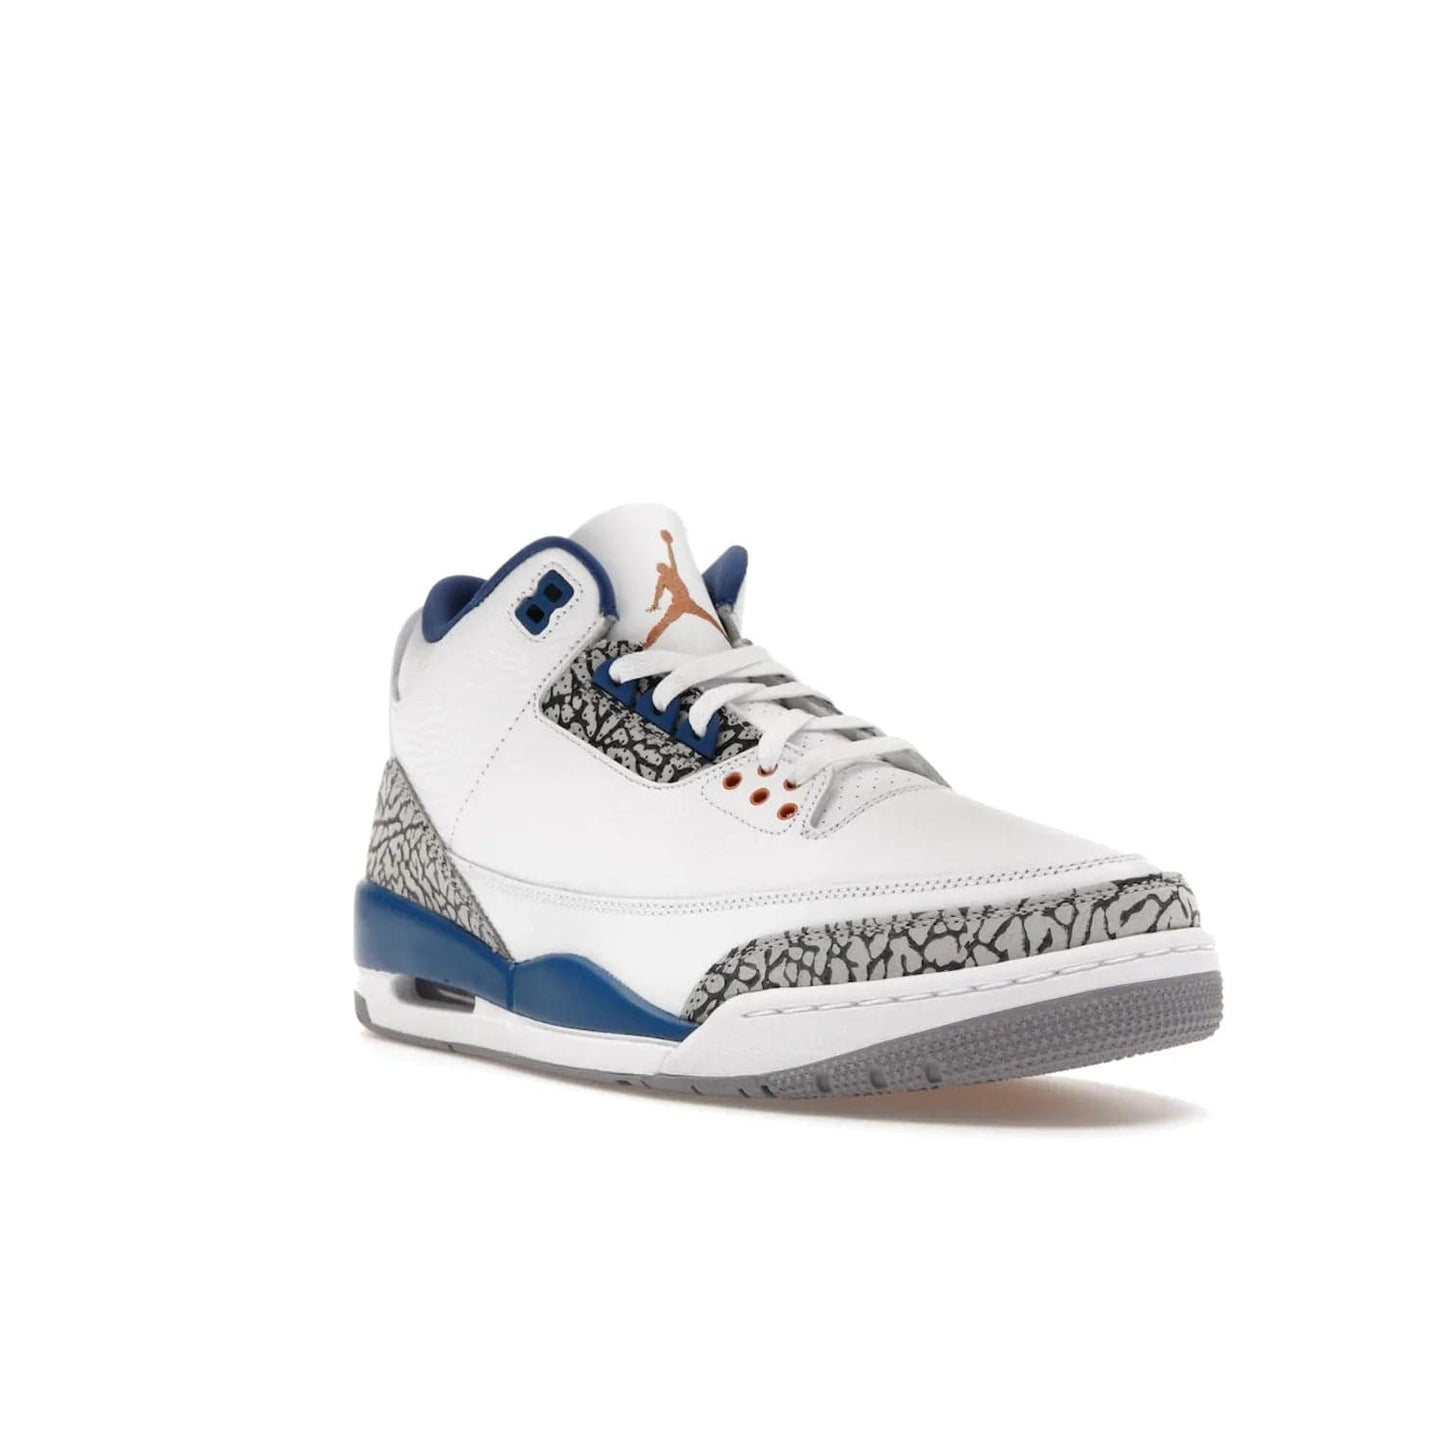 Jordan 3 Retro Wizards - Image 6 - Only at www.BallersClubKickz.com - ##
Special tribute sneaker from Jordan Brand to Michael Jordan's time with the Washington Wizards. Iconic white upper, orange Jumpman logo, blue accents, metallic copper details, and cement grey outsole. Buy the Air Jordan 3 Retro Wizards April 29, 2023.